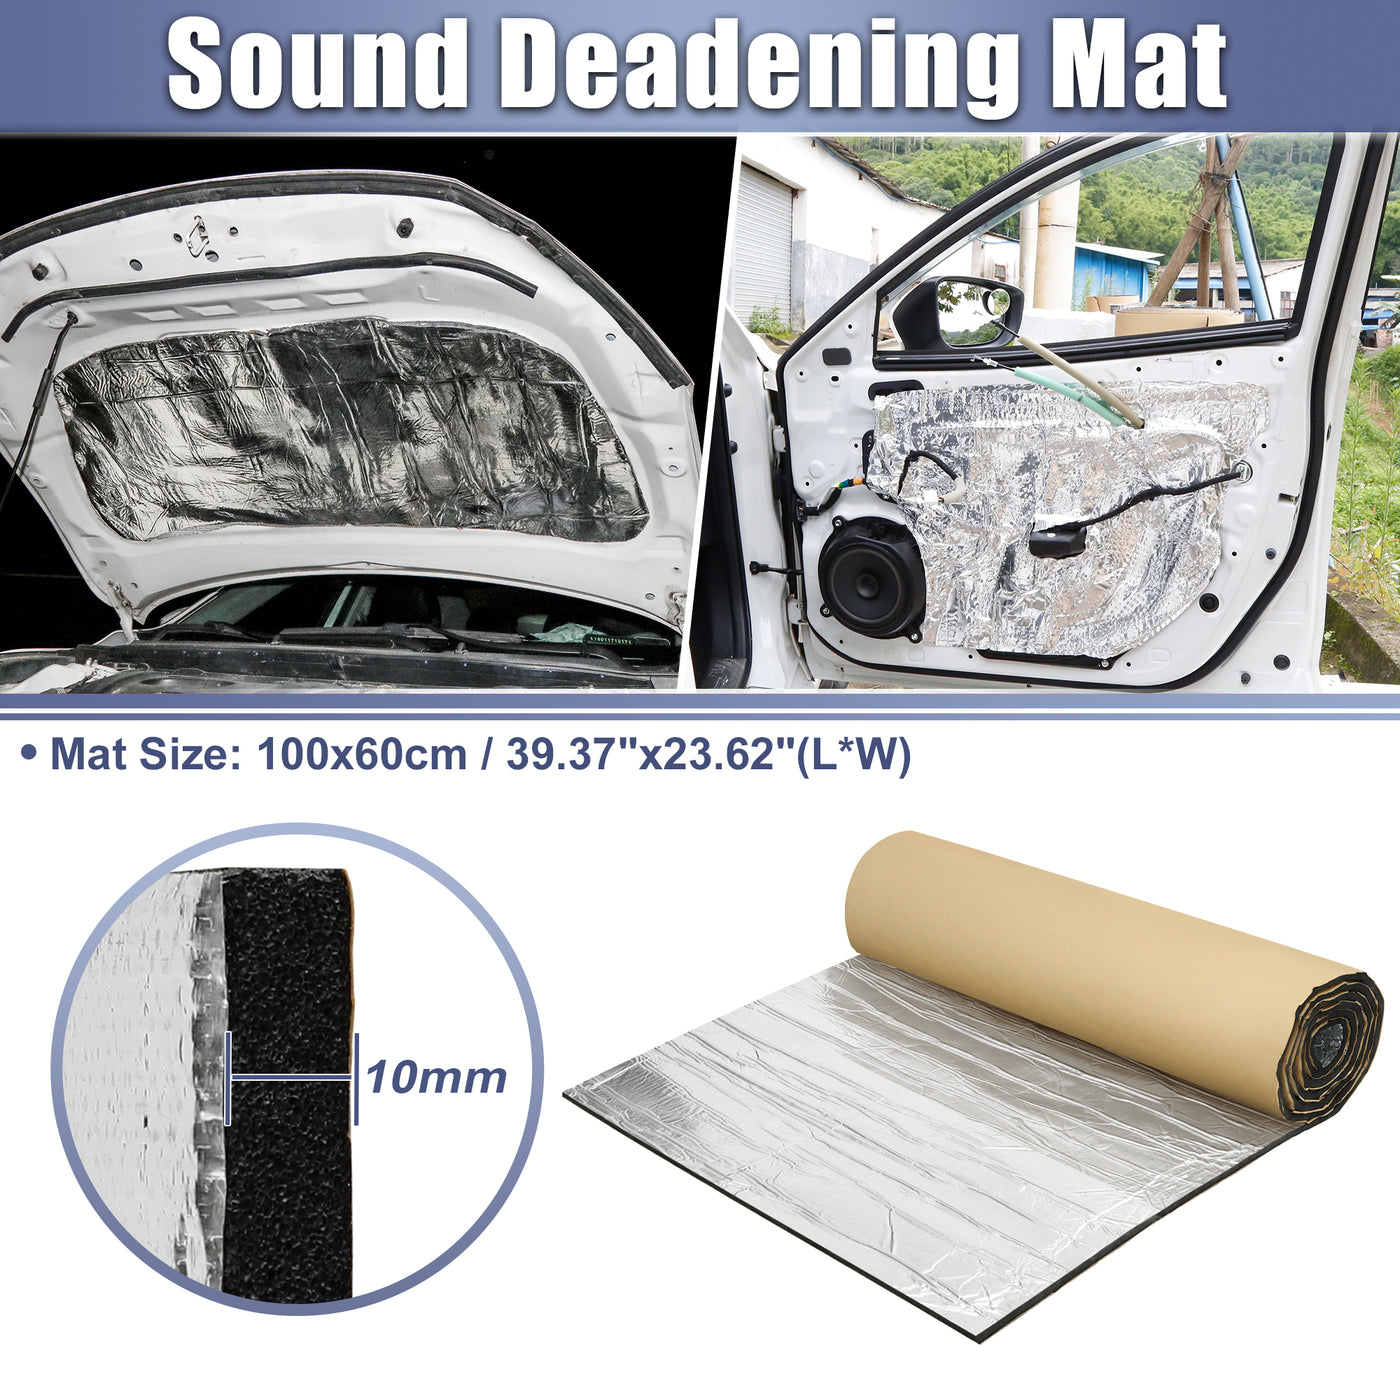 X AUTOHAUX 394mil 10mm 6.45sqft Car Sound Deadening Mat Glassfiber Closed Cell Foam Heat Shield Material Damping Self Adhesive Universal for Hood Fender and Boat Engine Cover 39.37"x23.62"